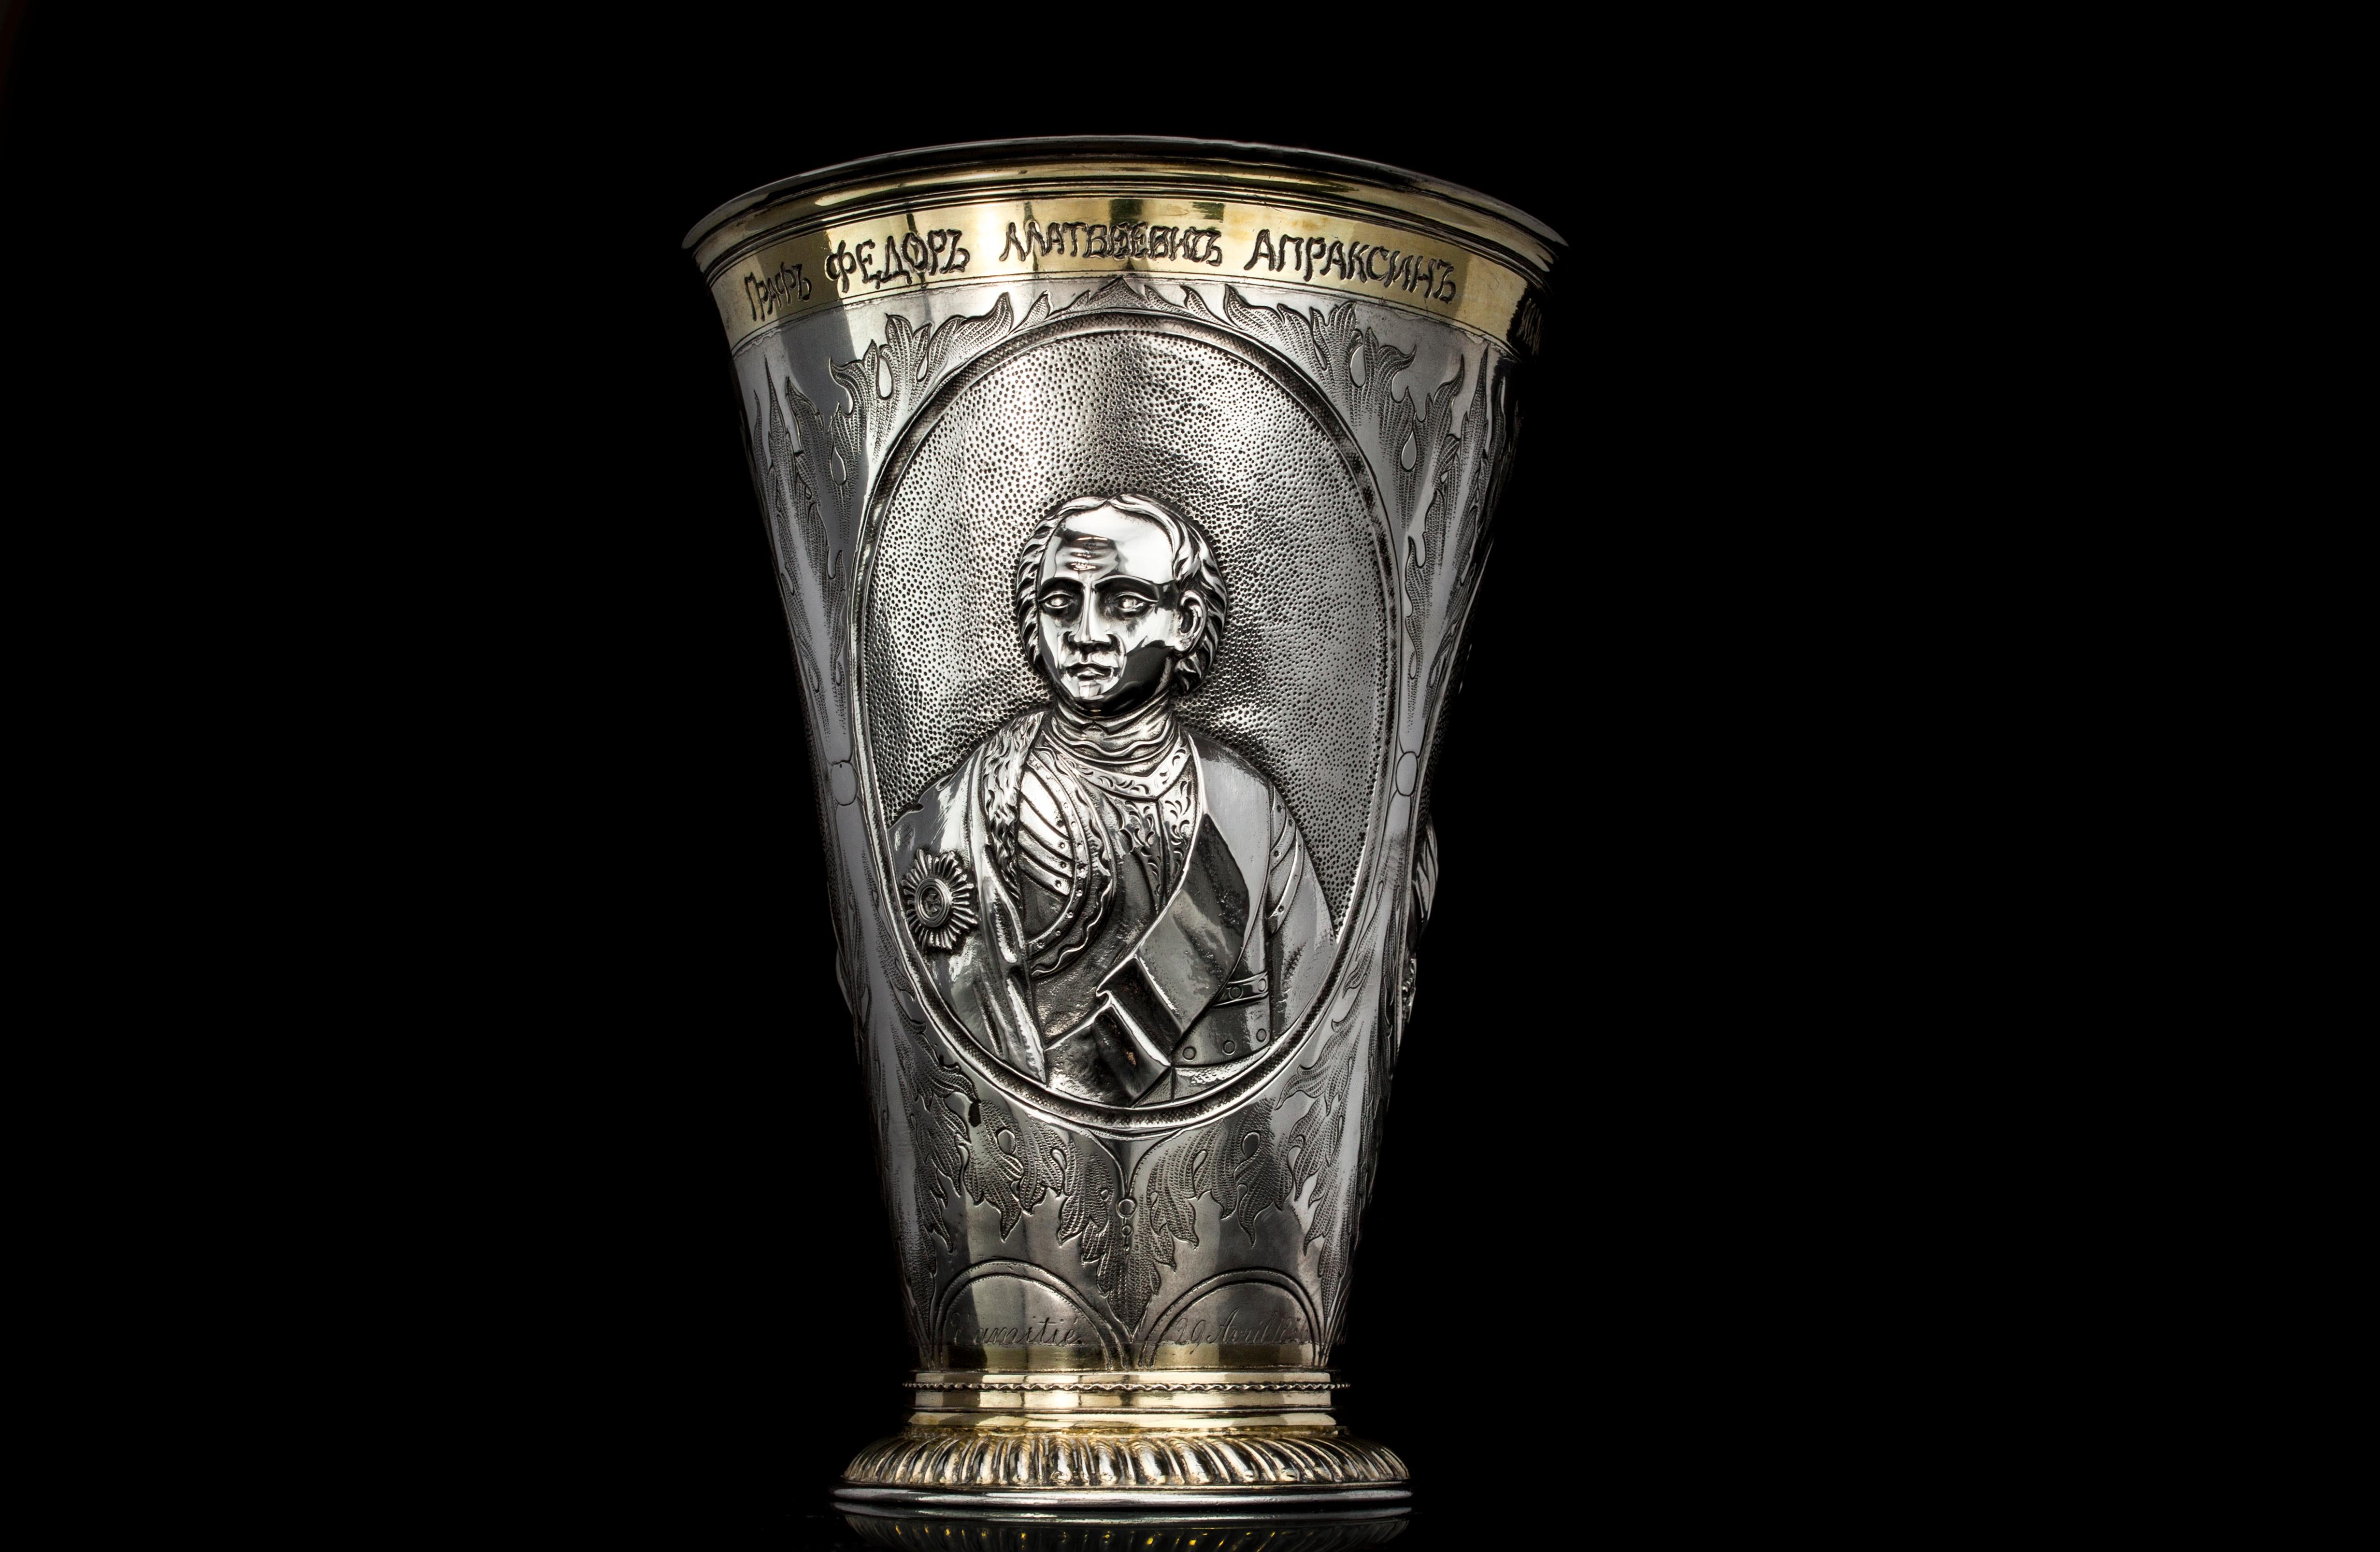 Antique Russian silver-gilt commemoration vase with Fyodor Apraksin, Piotr Velikiy, Ivan Ivanovic Buturlin profiles
Made in Russia, St Peterburg, late 18th-early 19th century
Maker: IL (unidentified)

Russian standard Zolotnick 84 / 875